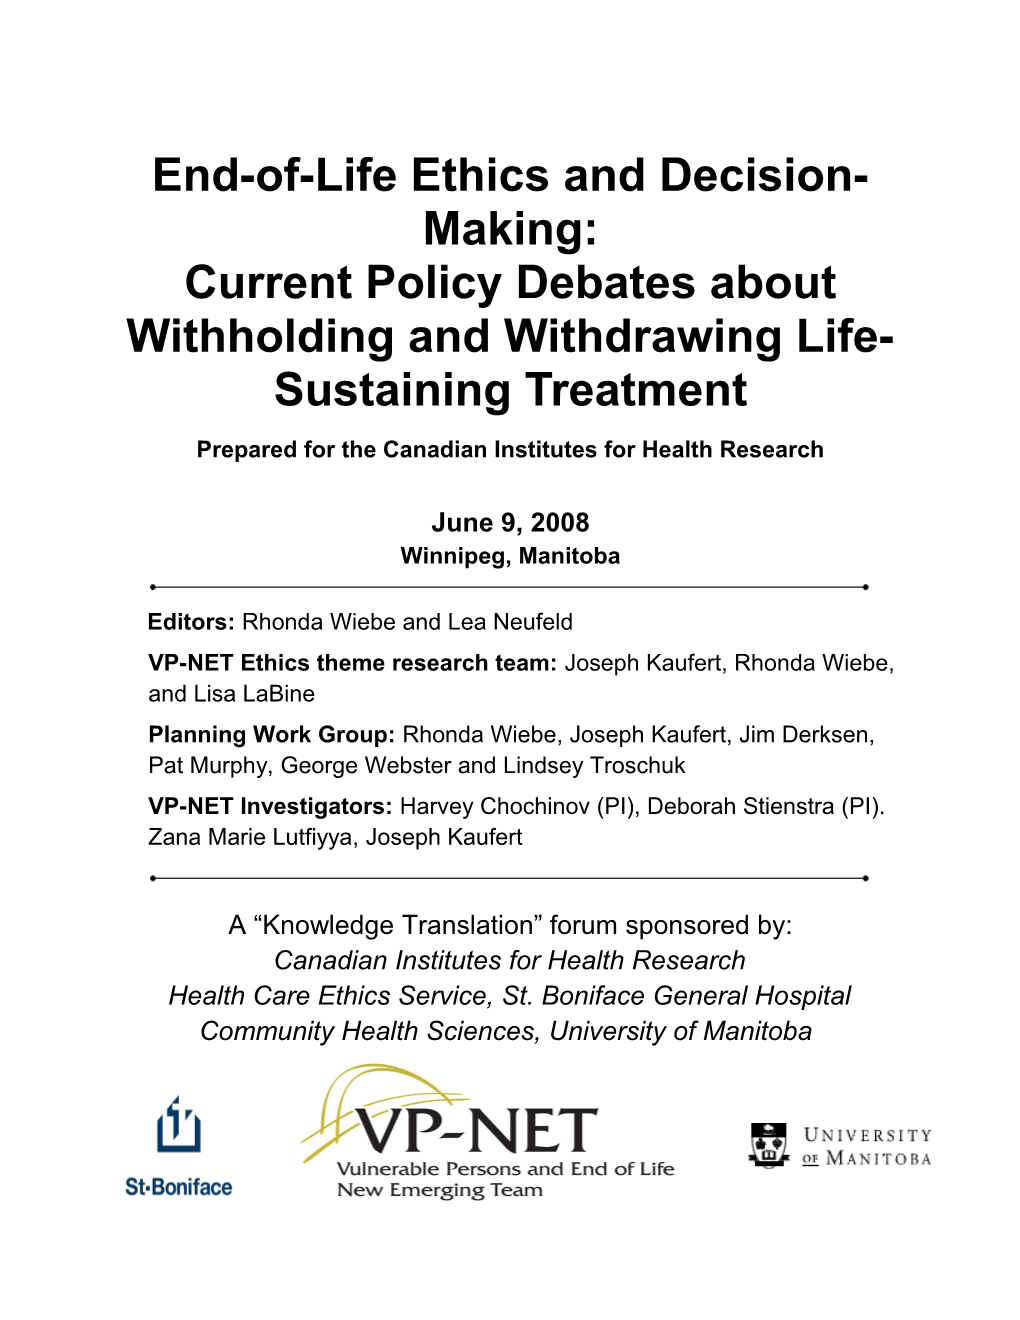 Current Policy Debates About Withholding and Withdrawing Life-Sustaining Treatment